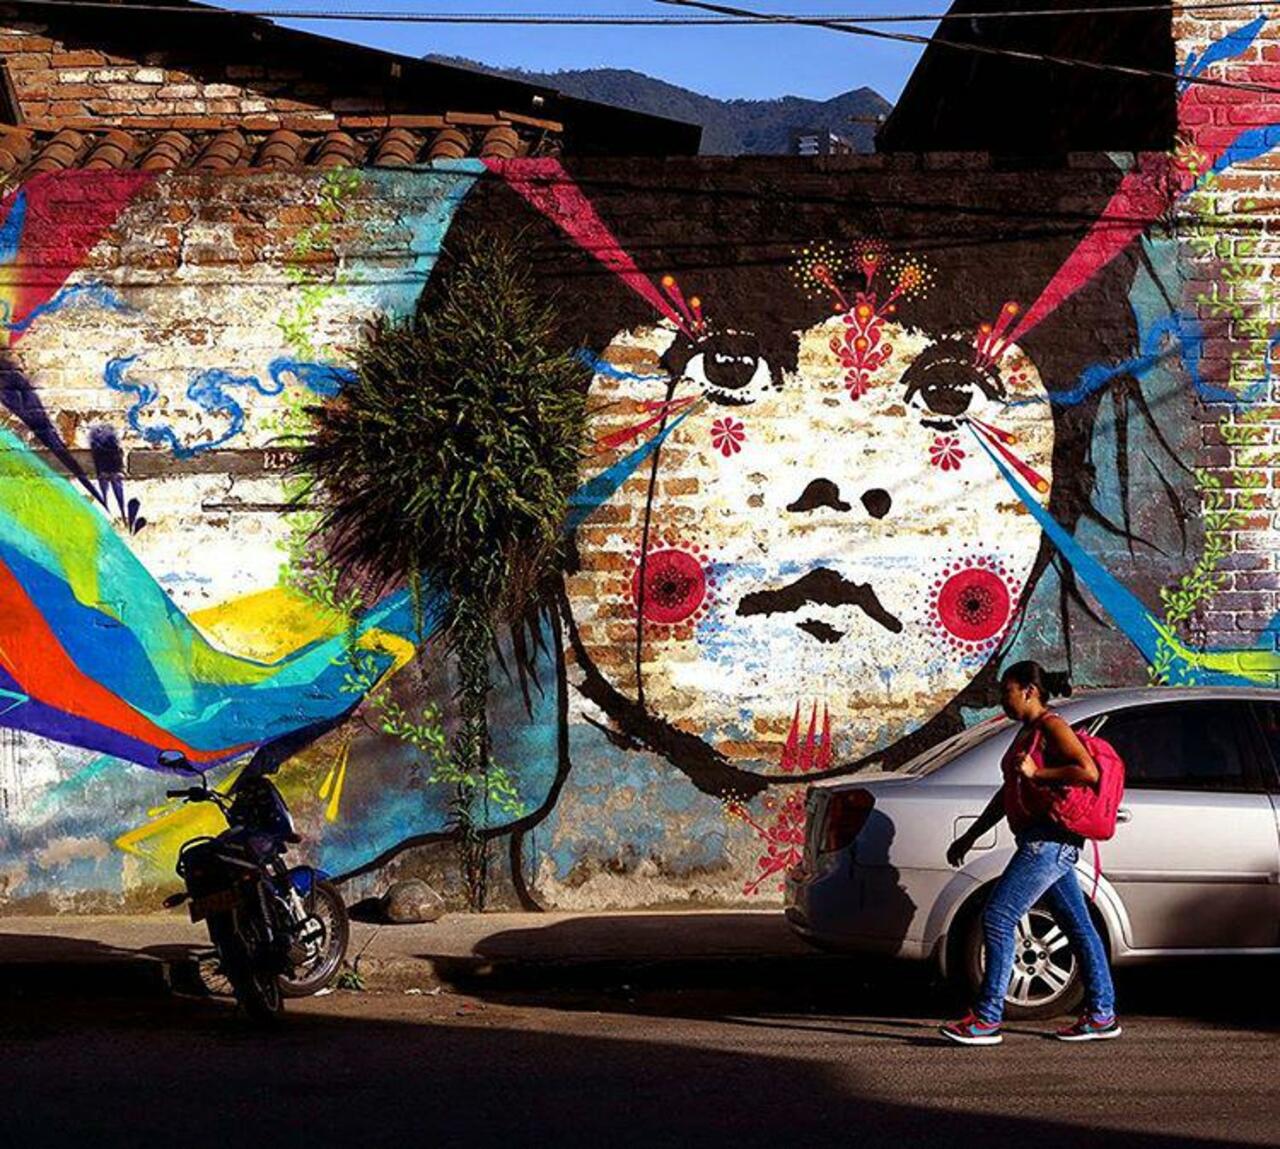 Something new from Stinkfish in Medellin, Colombia. #StreetArt #Graffiti #Mural http://t.co/vhhSEAEhaF